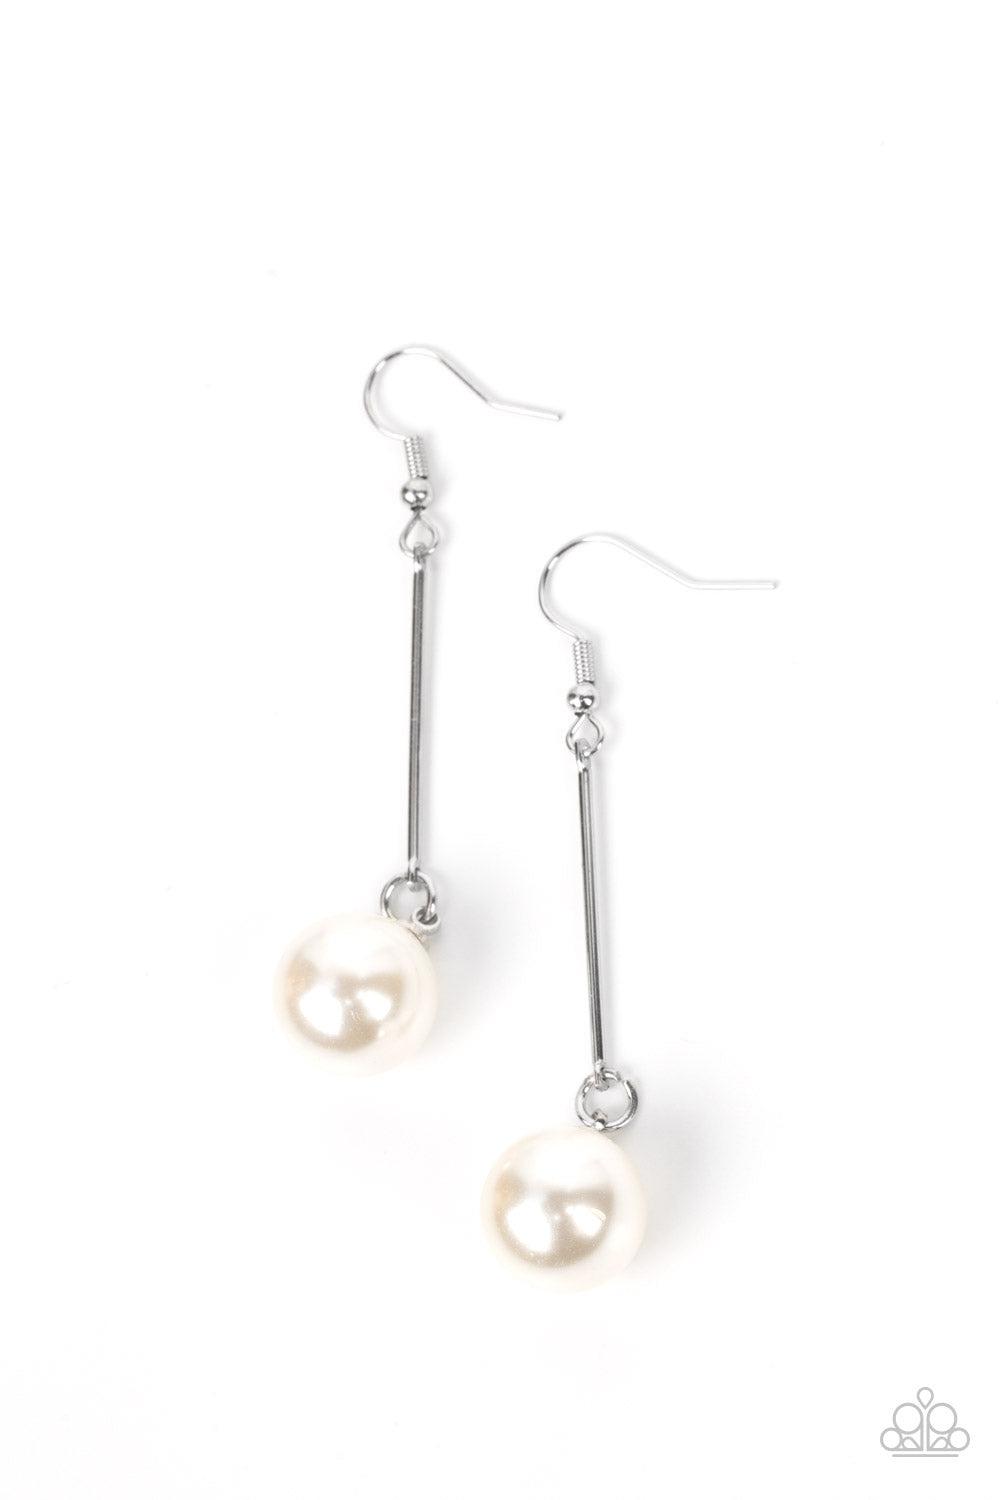 Pearl Redux White Earrings - Paparazzi Accessories- lightbox - CarasShop.com - $5 Jewelry by Cara Jewels